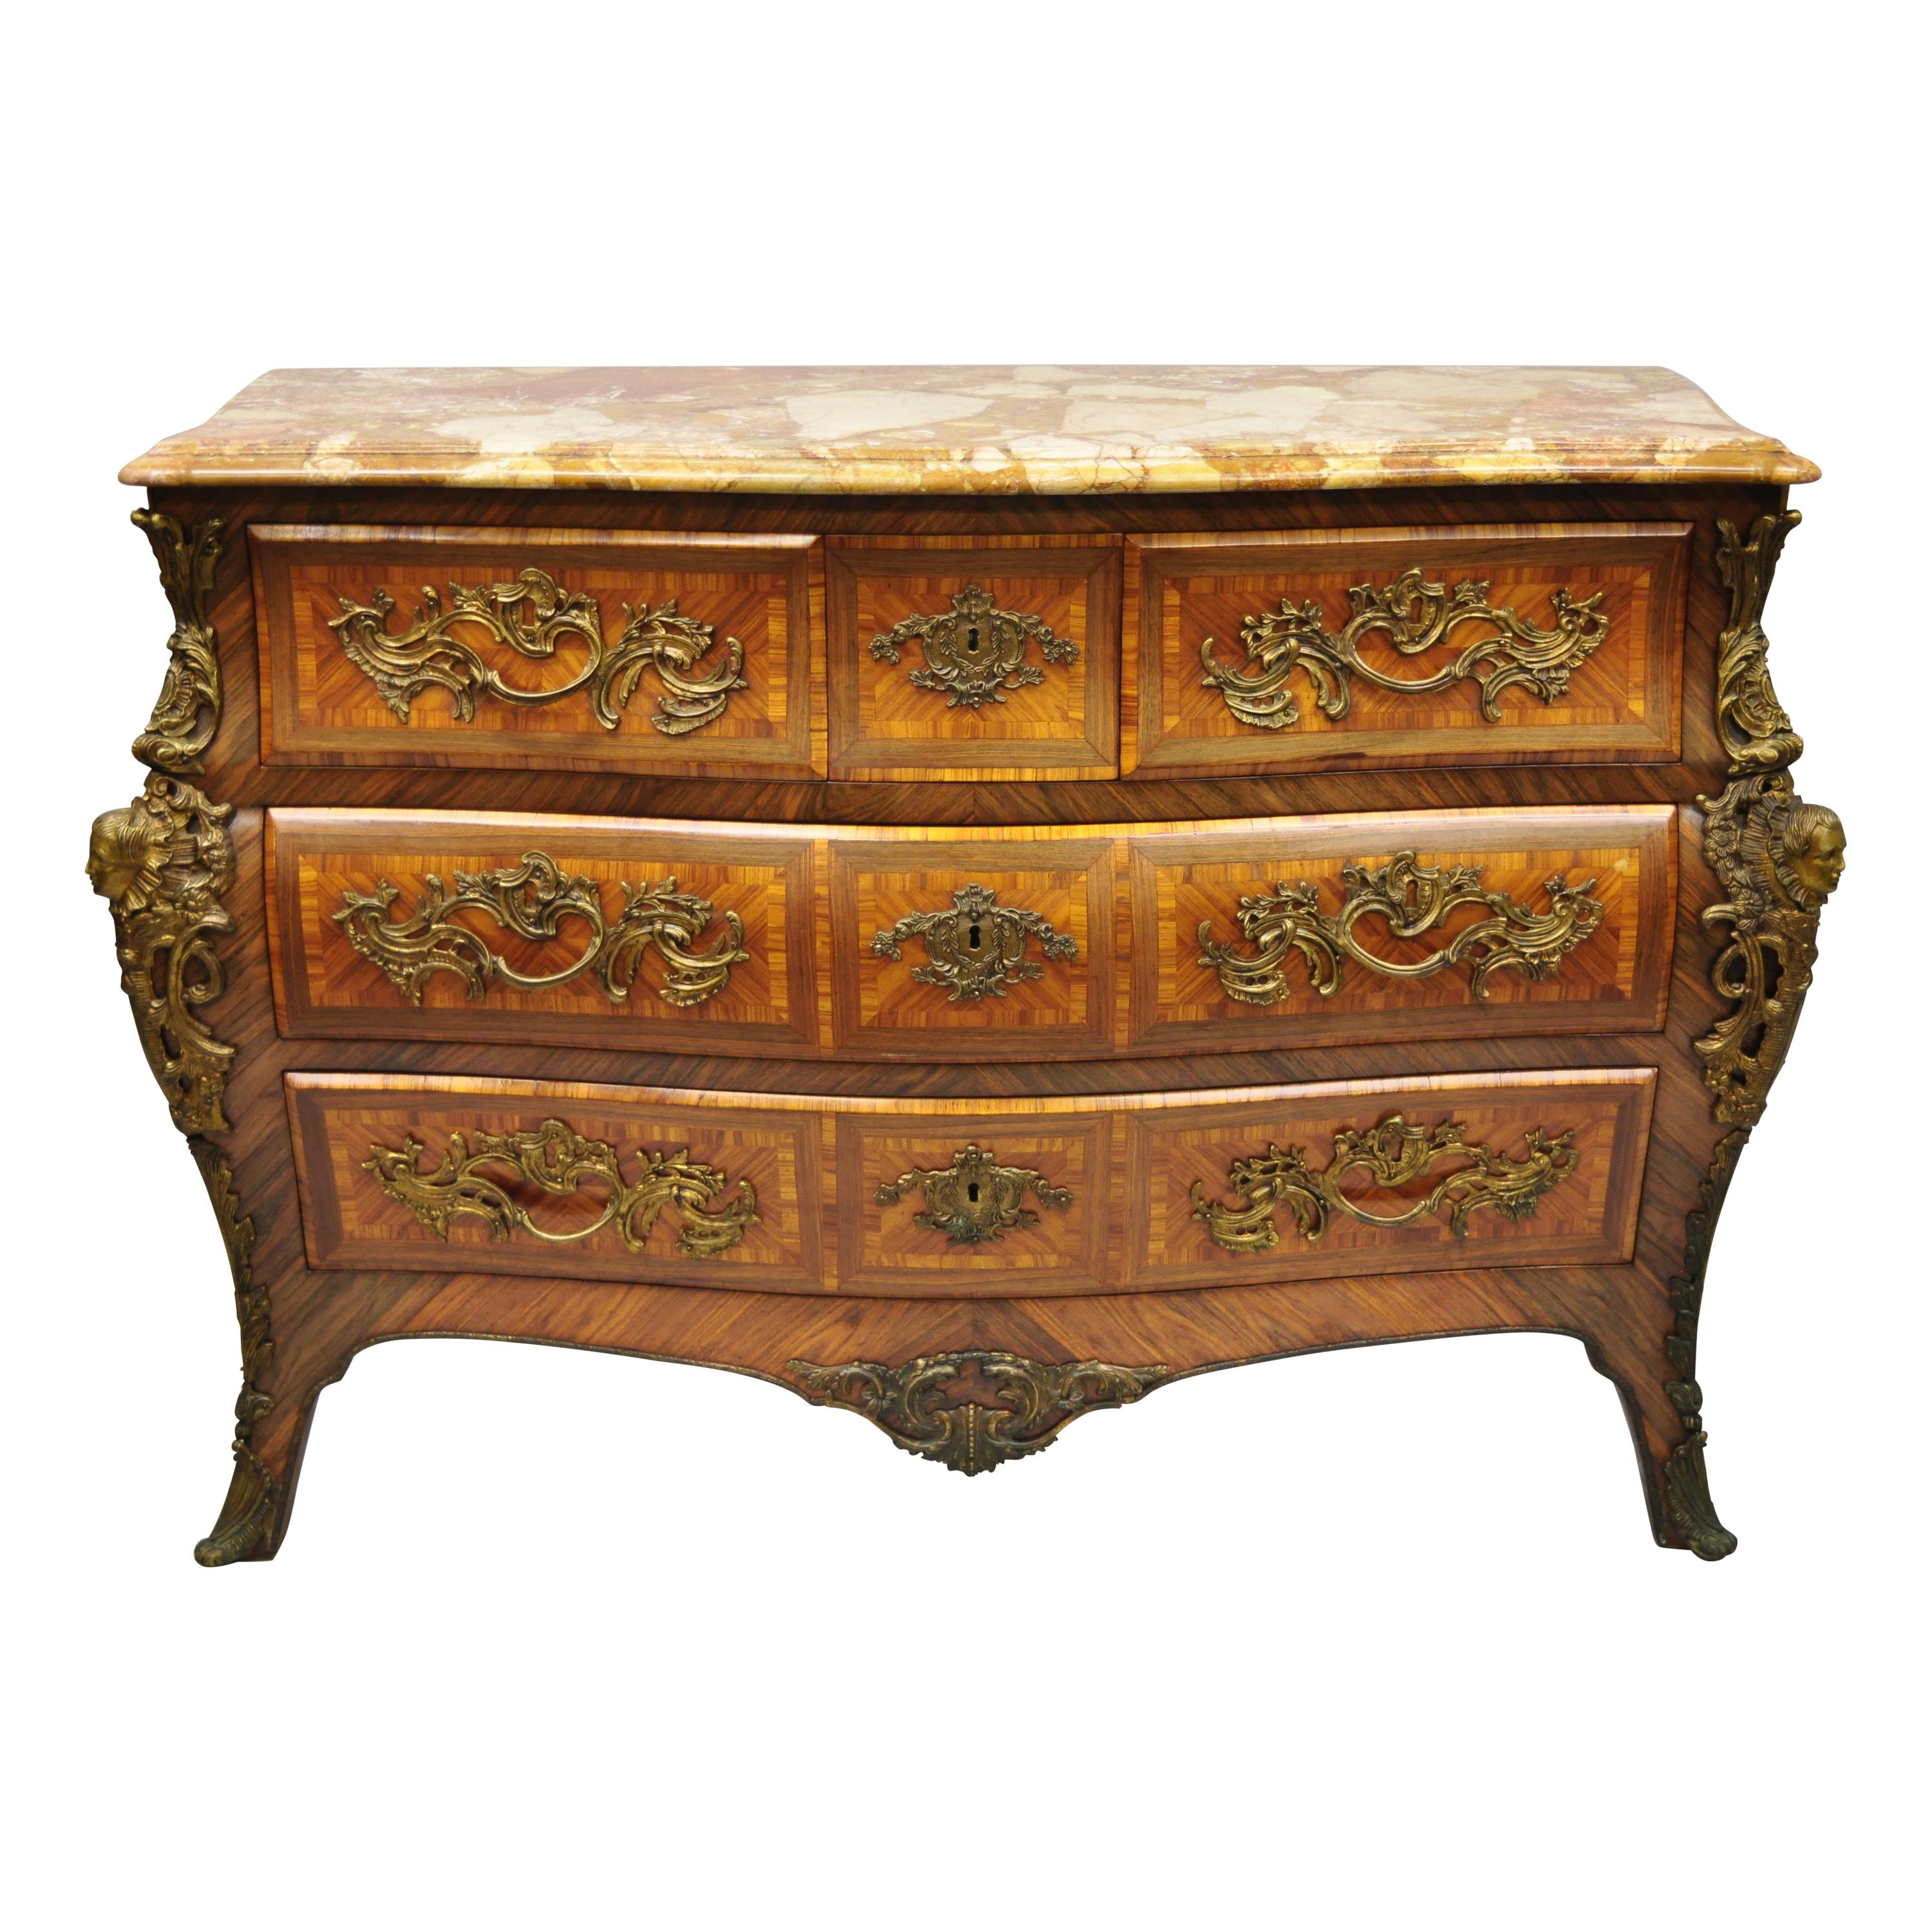 French Louis XV Style Inlaid Marble-Top Bombe Commode Chest with Bronze Figures